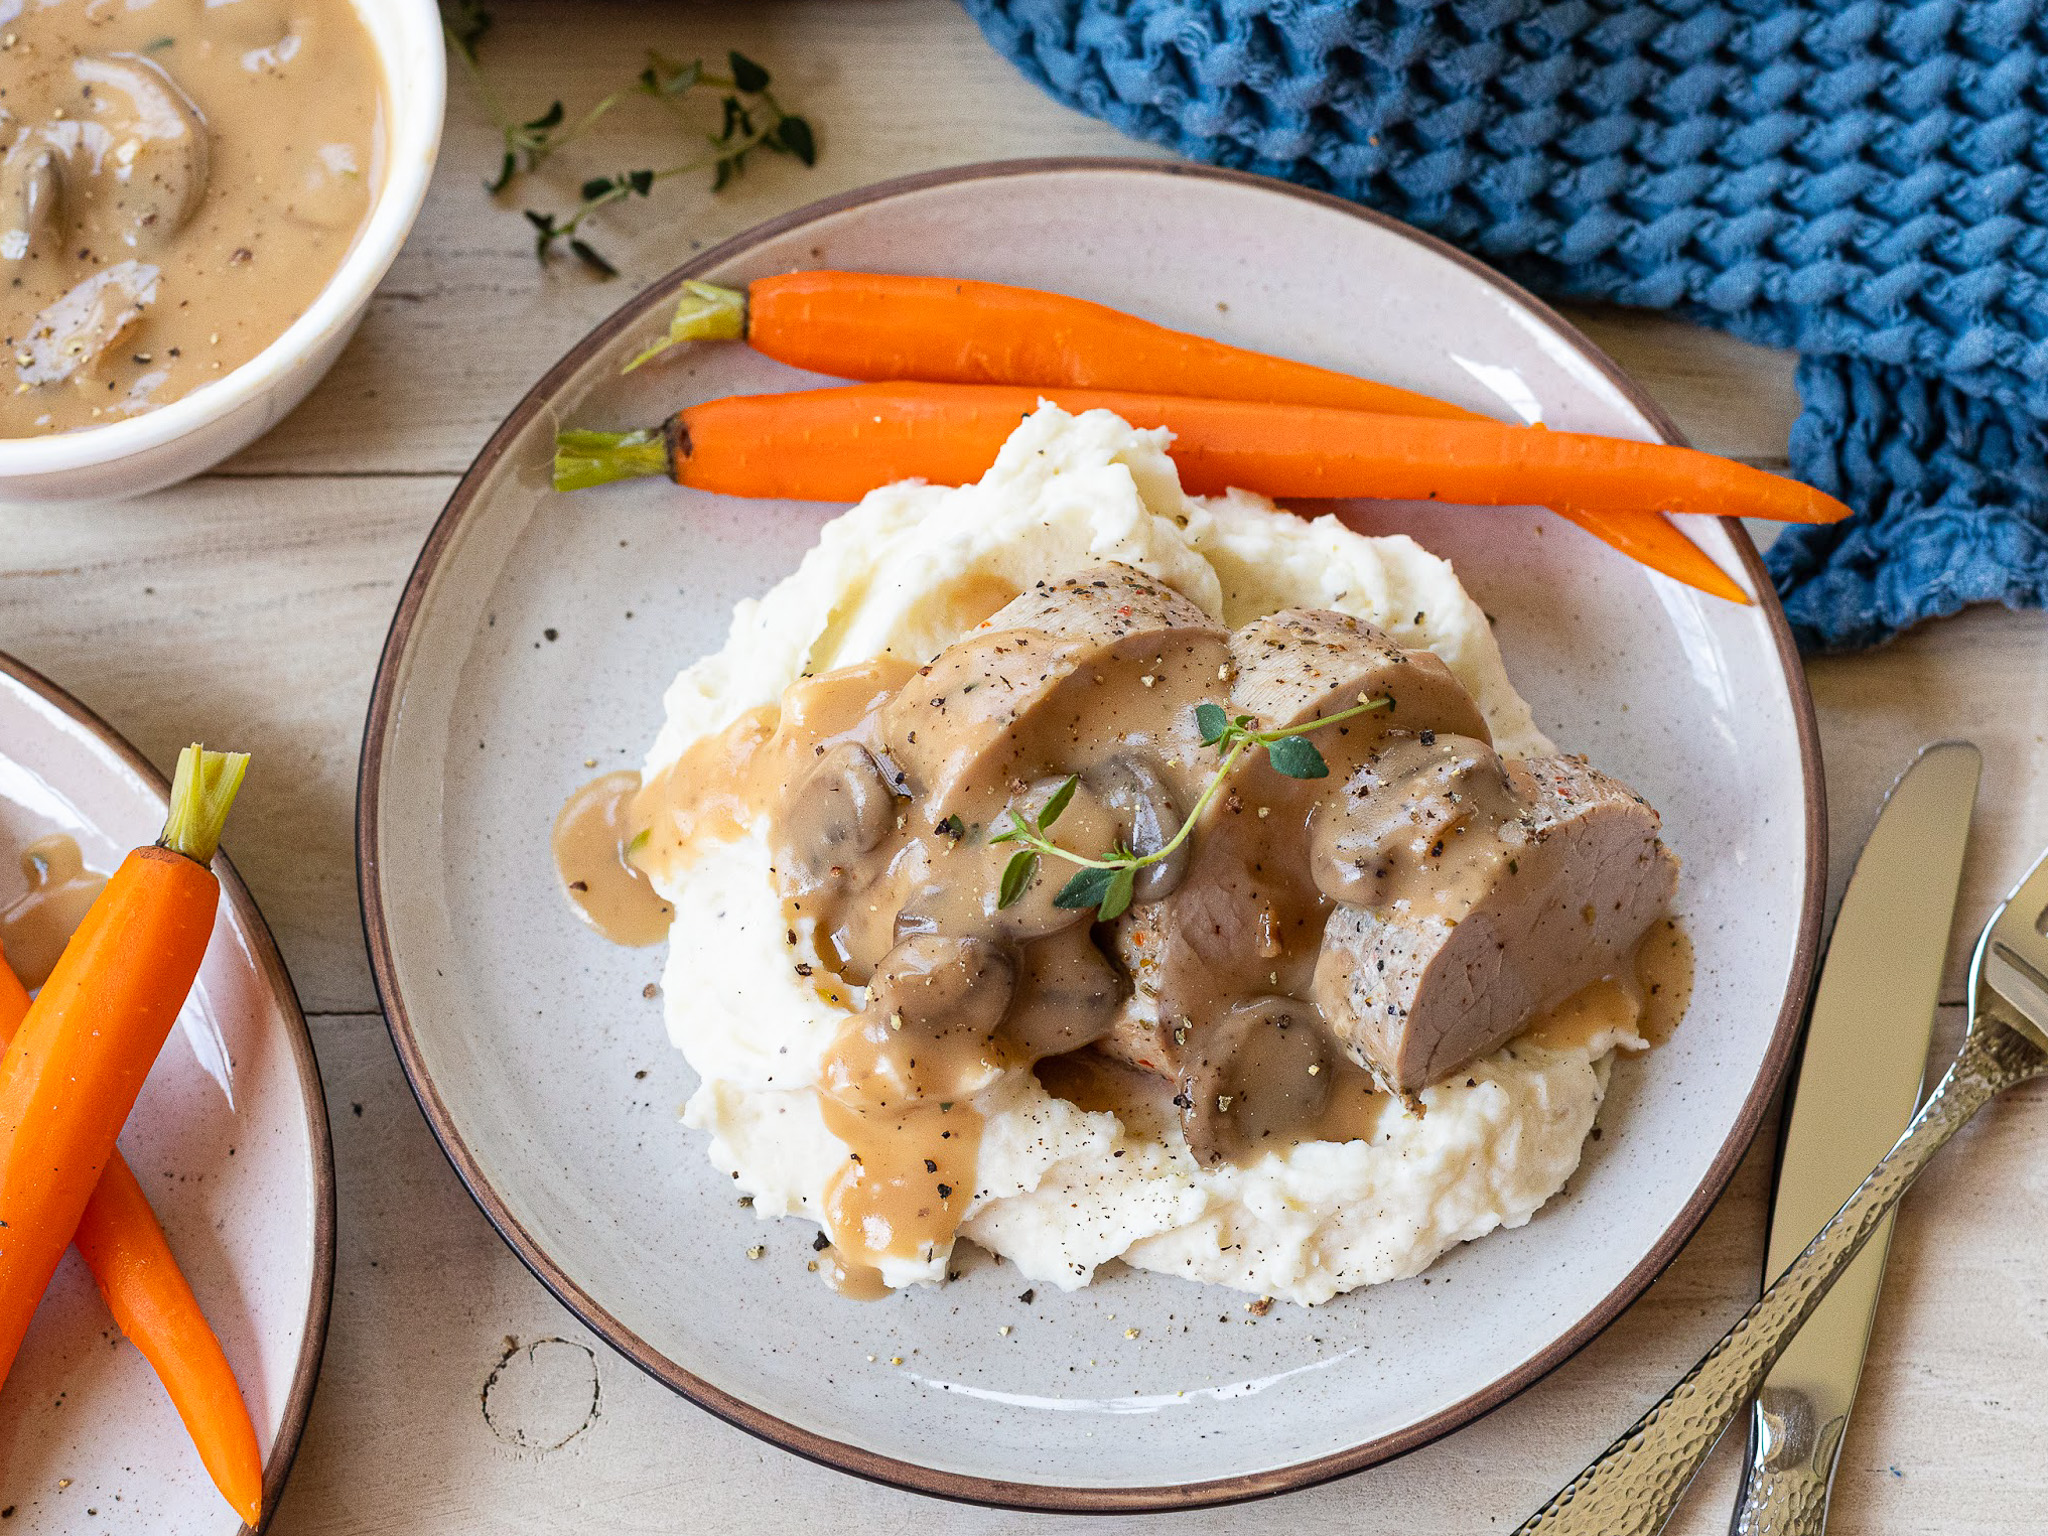 Hatfield Marinated Pork Tenderloin Is Perfect for Any Gathering – Try It With My Easy Mushroom Sauce